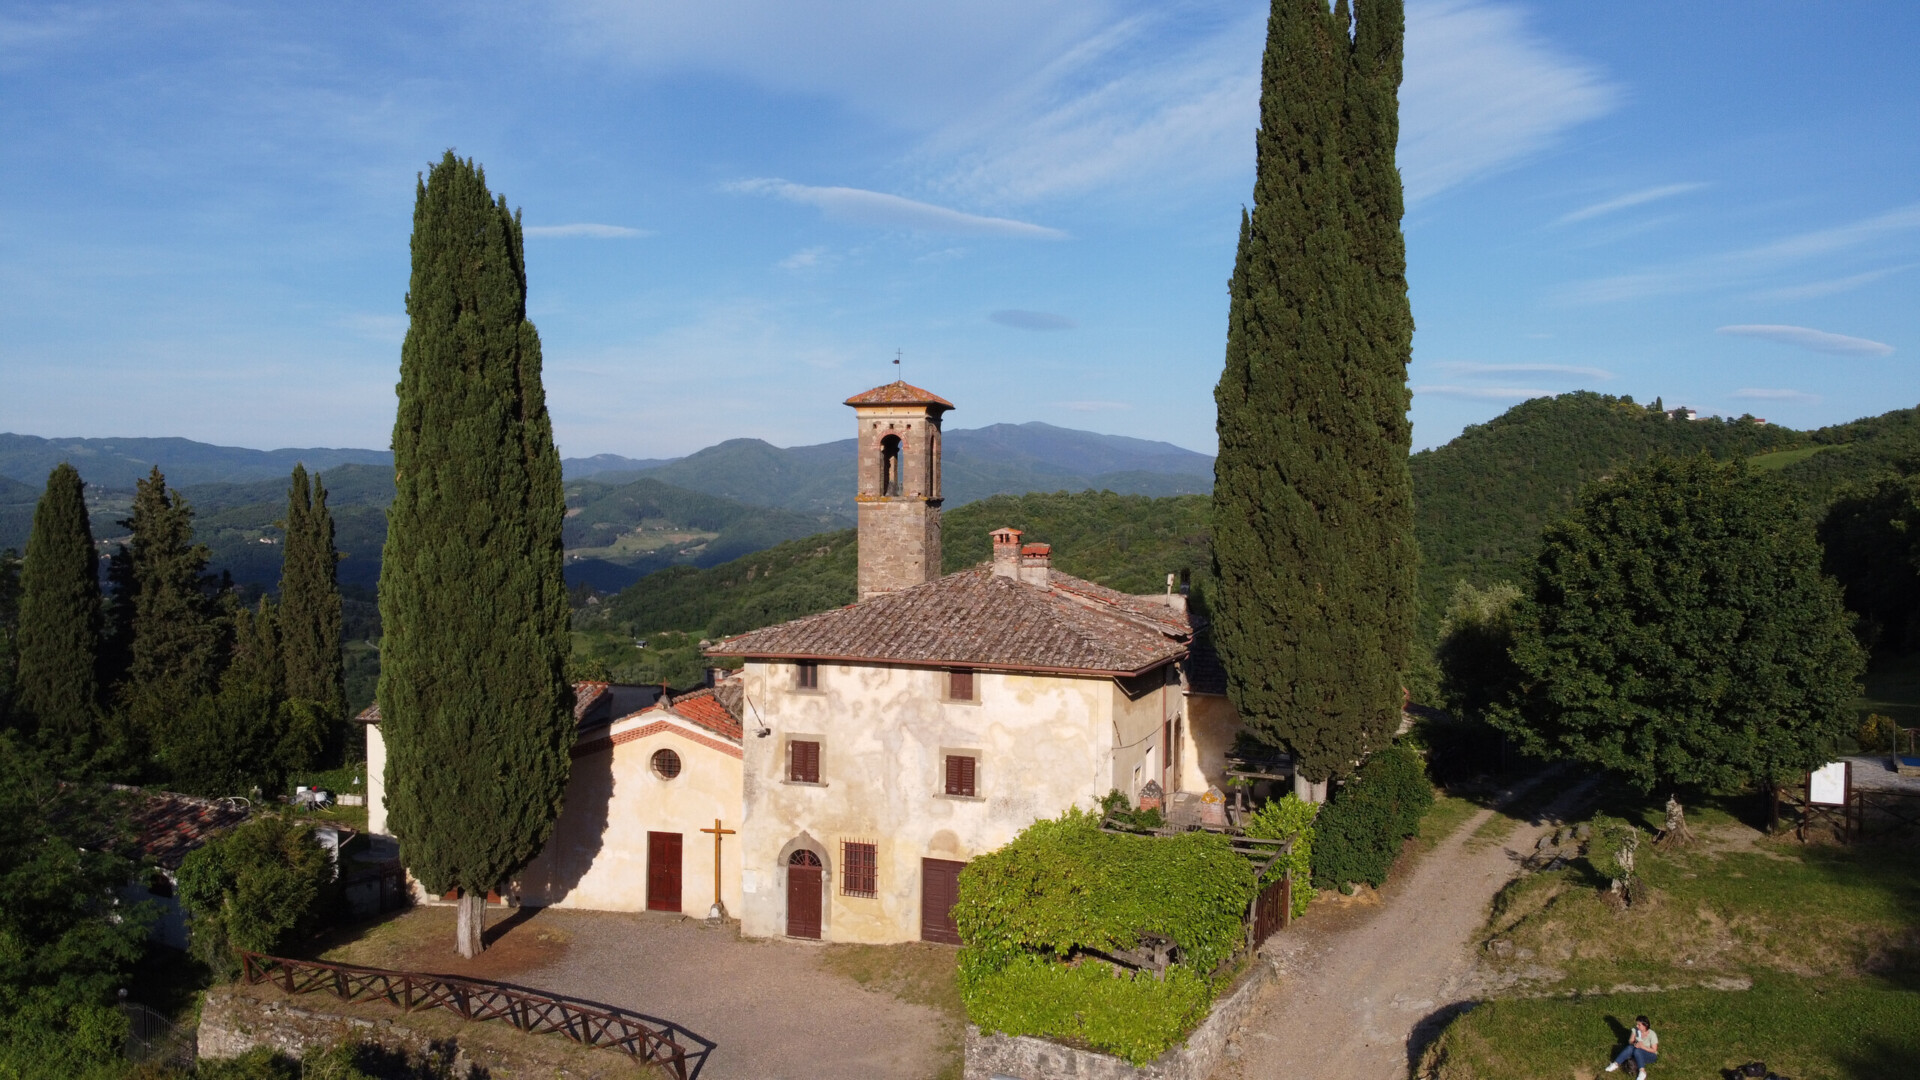 Church of Barbiana in the countryside of Vicchio in the province of Florence where the priest Don Lorenzo Milani lived